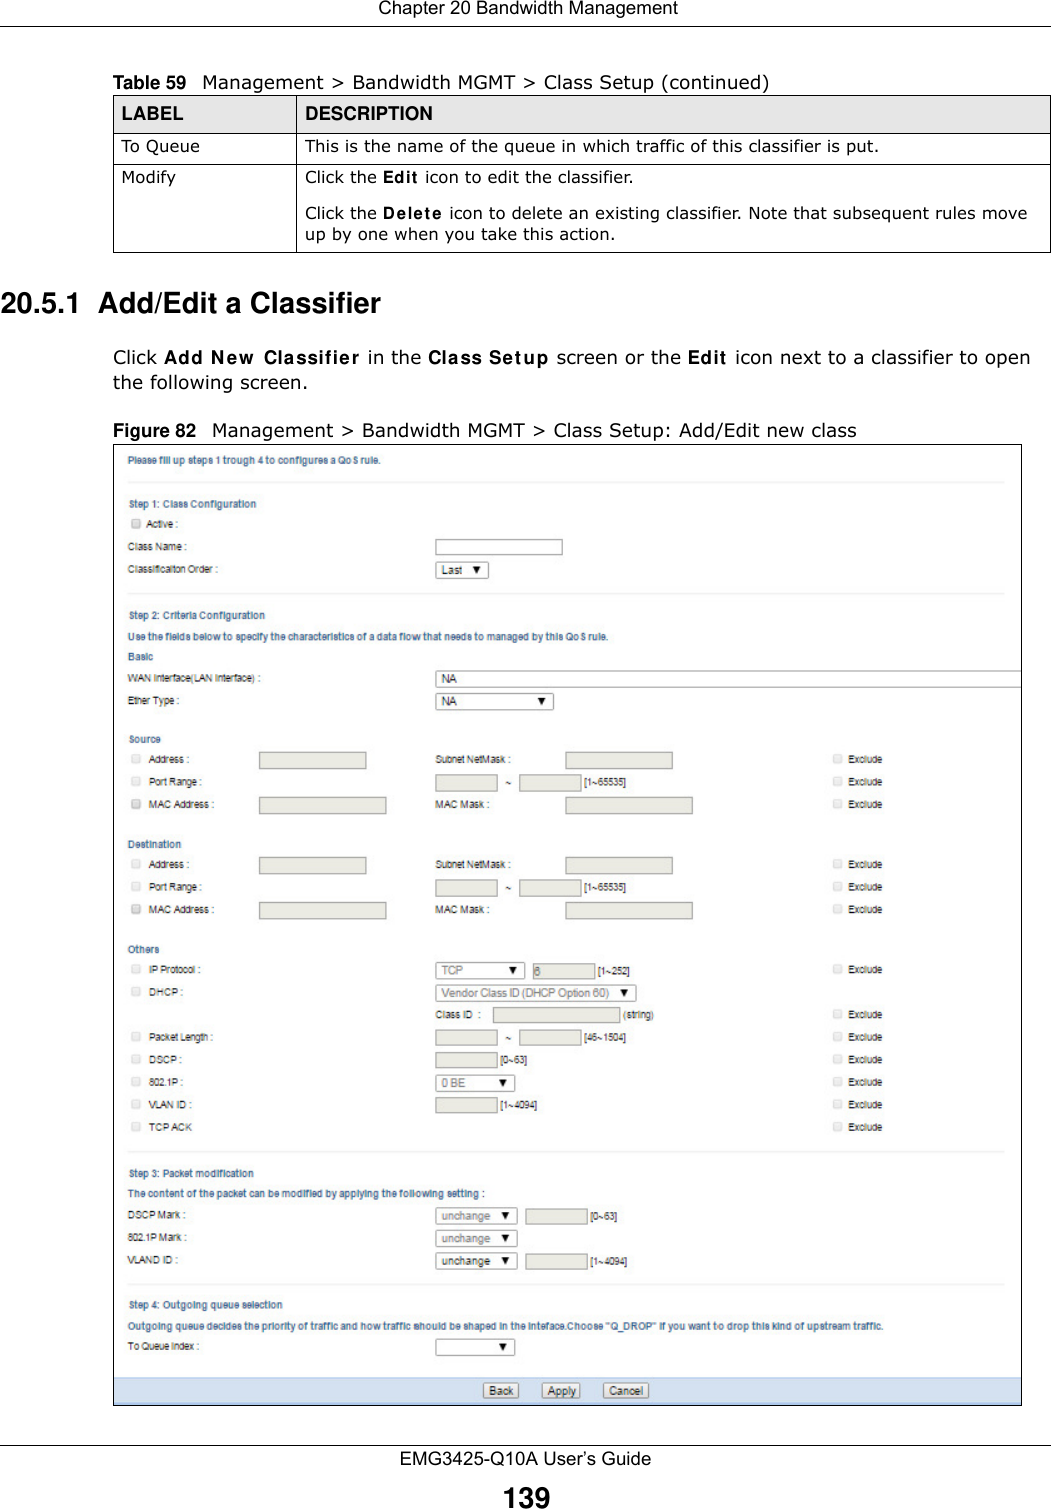  Chapter 20 Bandwidth ManagementEMG3425-Q10A User’s Guide13920.5.1  Add/Edit a Classifier Click Add N e w  Classifie r in the Class Set u p screen or the Ed it  icon next to a classifier to open the following screen. Figure 82   Management &gt; Bandwidth MGMT &gt; Class Setup: Add/Edit new classTo Que u e This is the name of the queue in which traffic of this classifier is put.Modify Click the Ed it  icon to edit the classifier.Click the D e let e  icon to delete an existing classifier. Note that subsequent rules move up by one when you take this action.Table 59   Management &gt; Bandwidth MGMT &gt; Class Setup (continued)LABEL DESCRIPTION